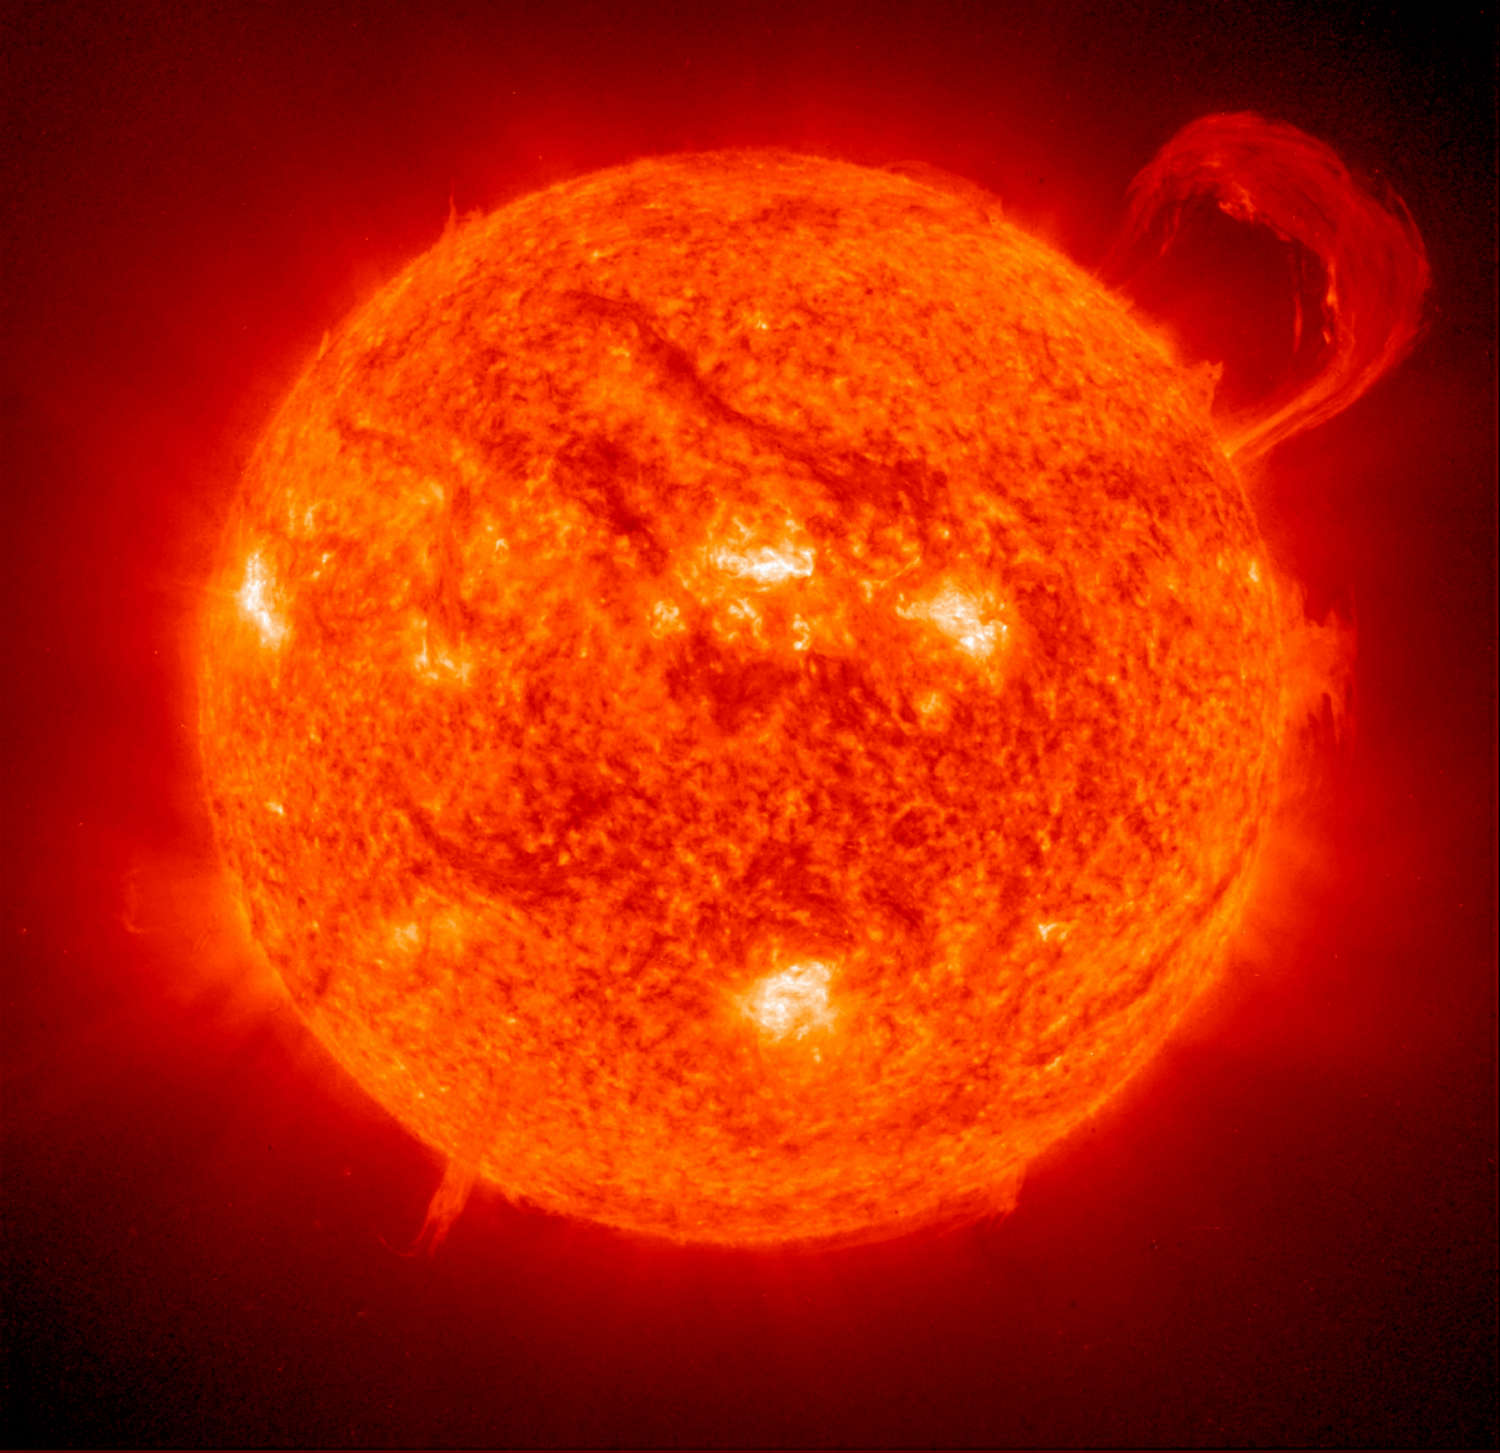 The Sun has a sibling star